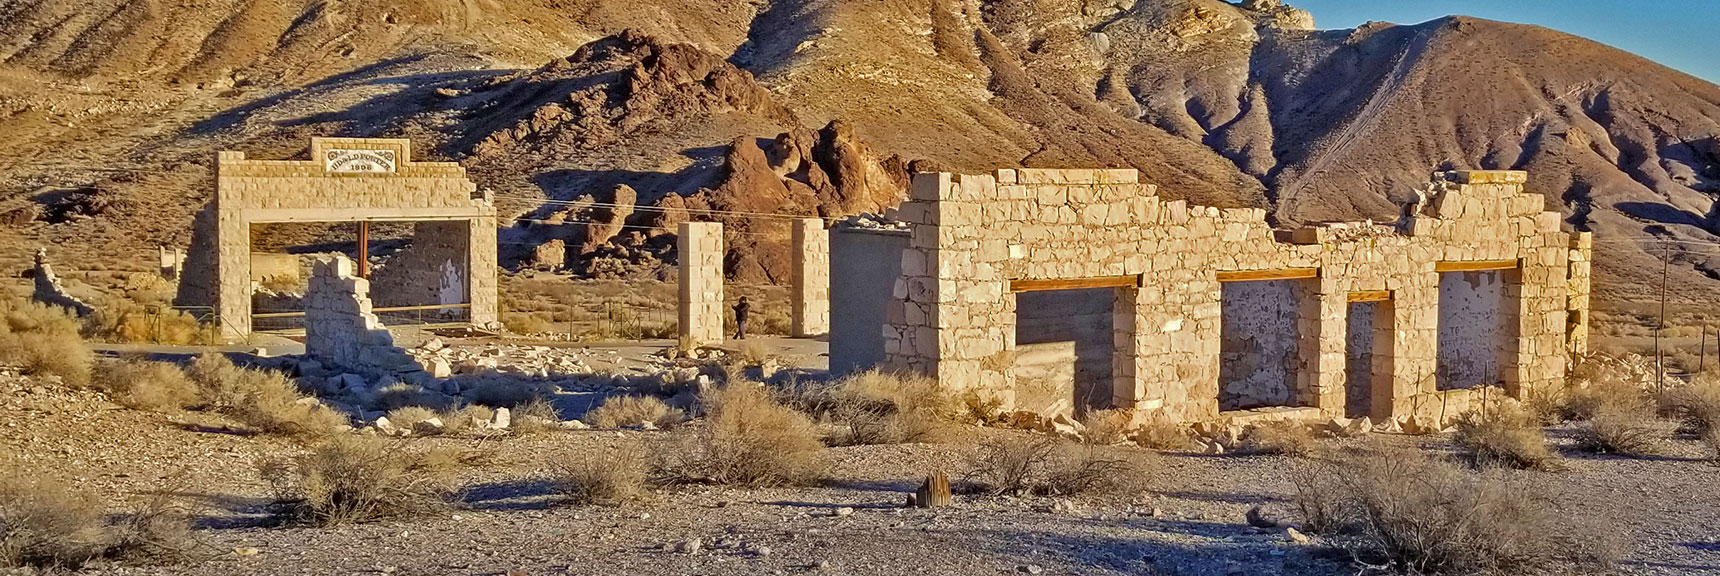 Overbury Bank Building and Porter Brothers' Store | Rhyolite Ghost Town | Death Valley Area, Nevada